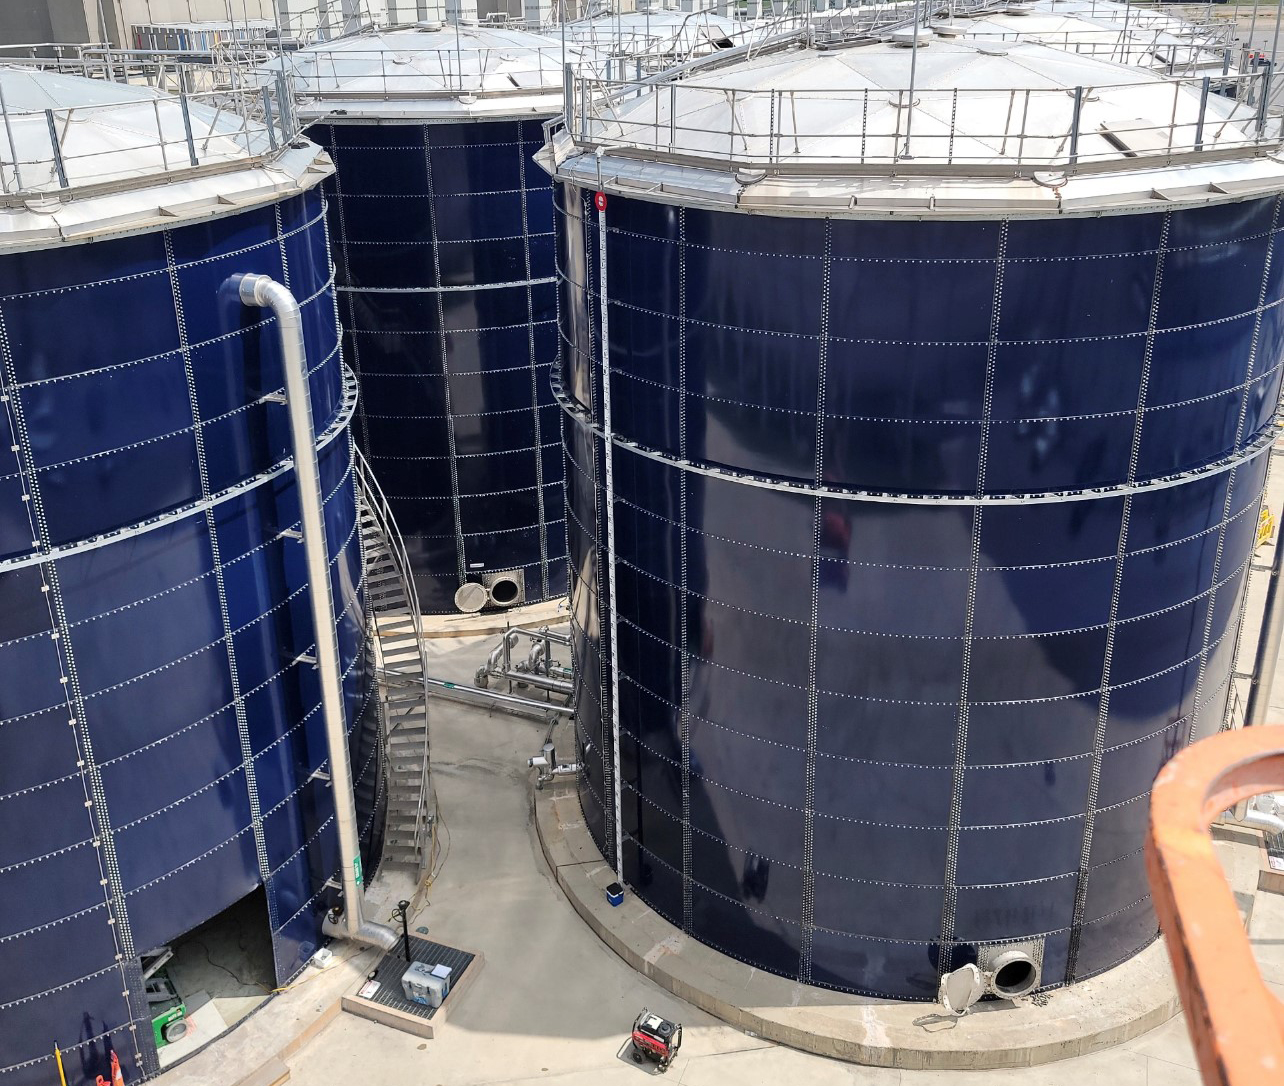 Cobalt blue water storage tanks with domes and safety rails